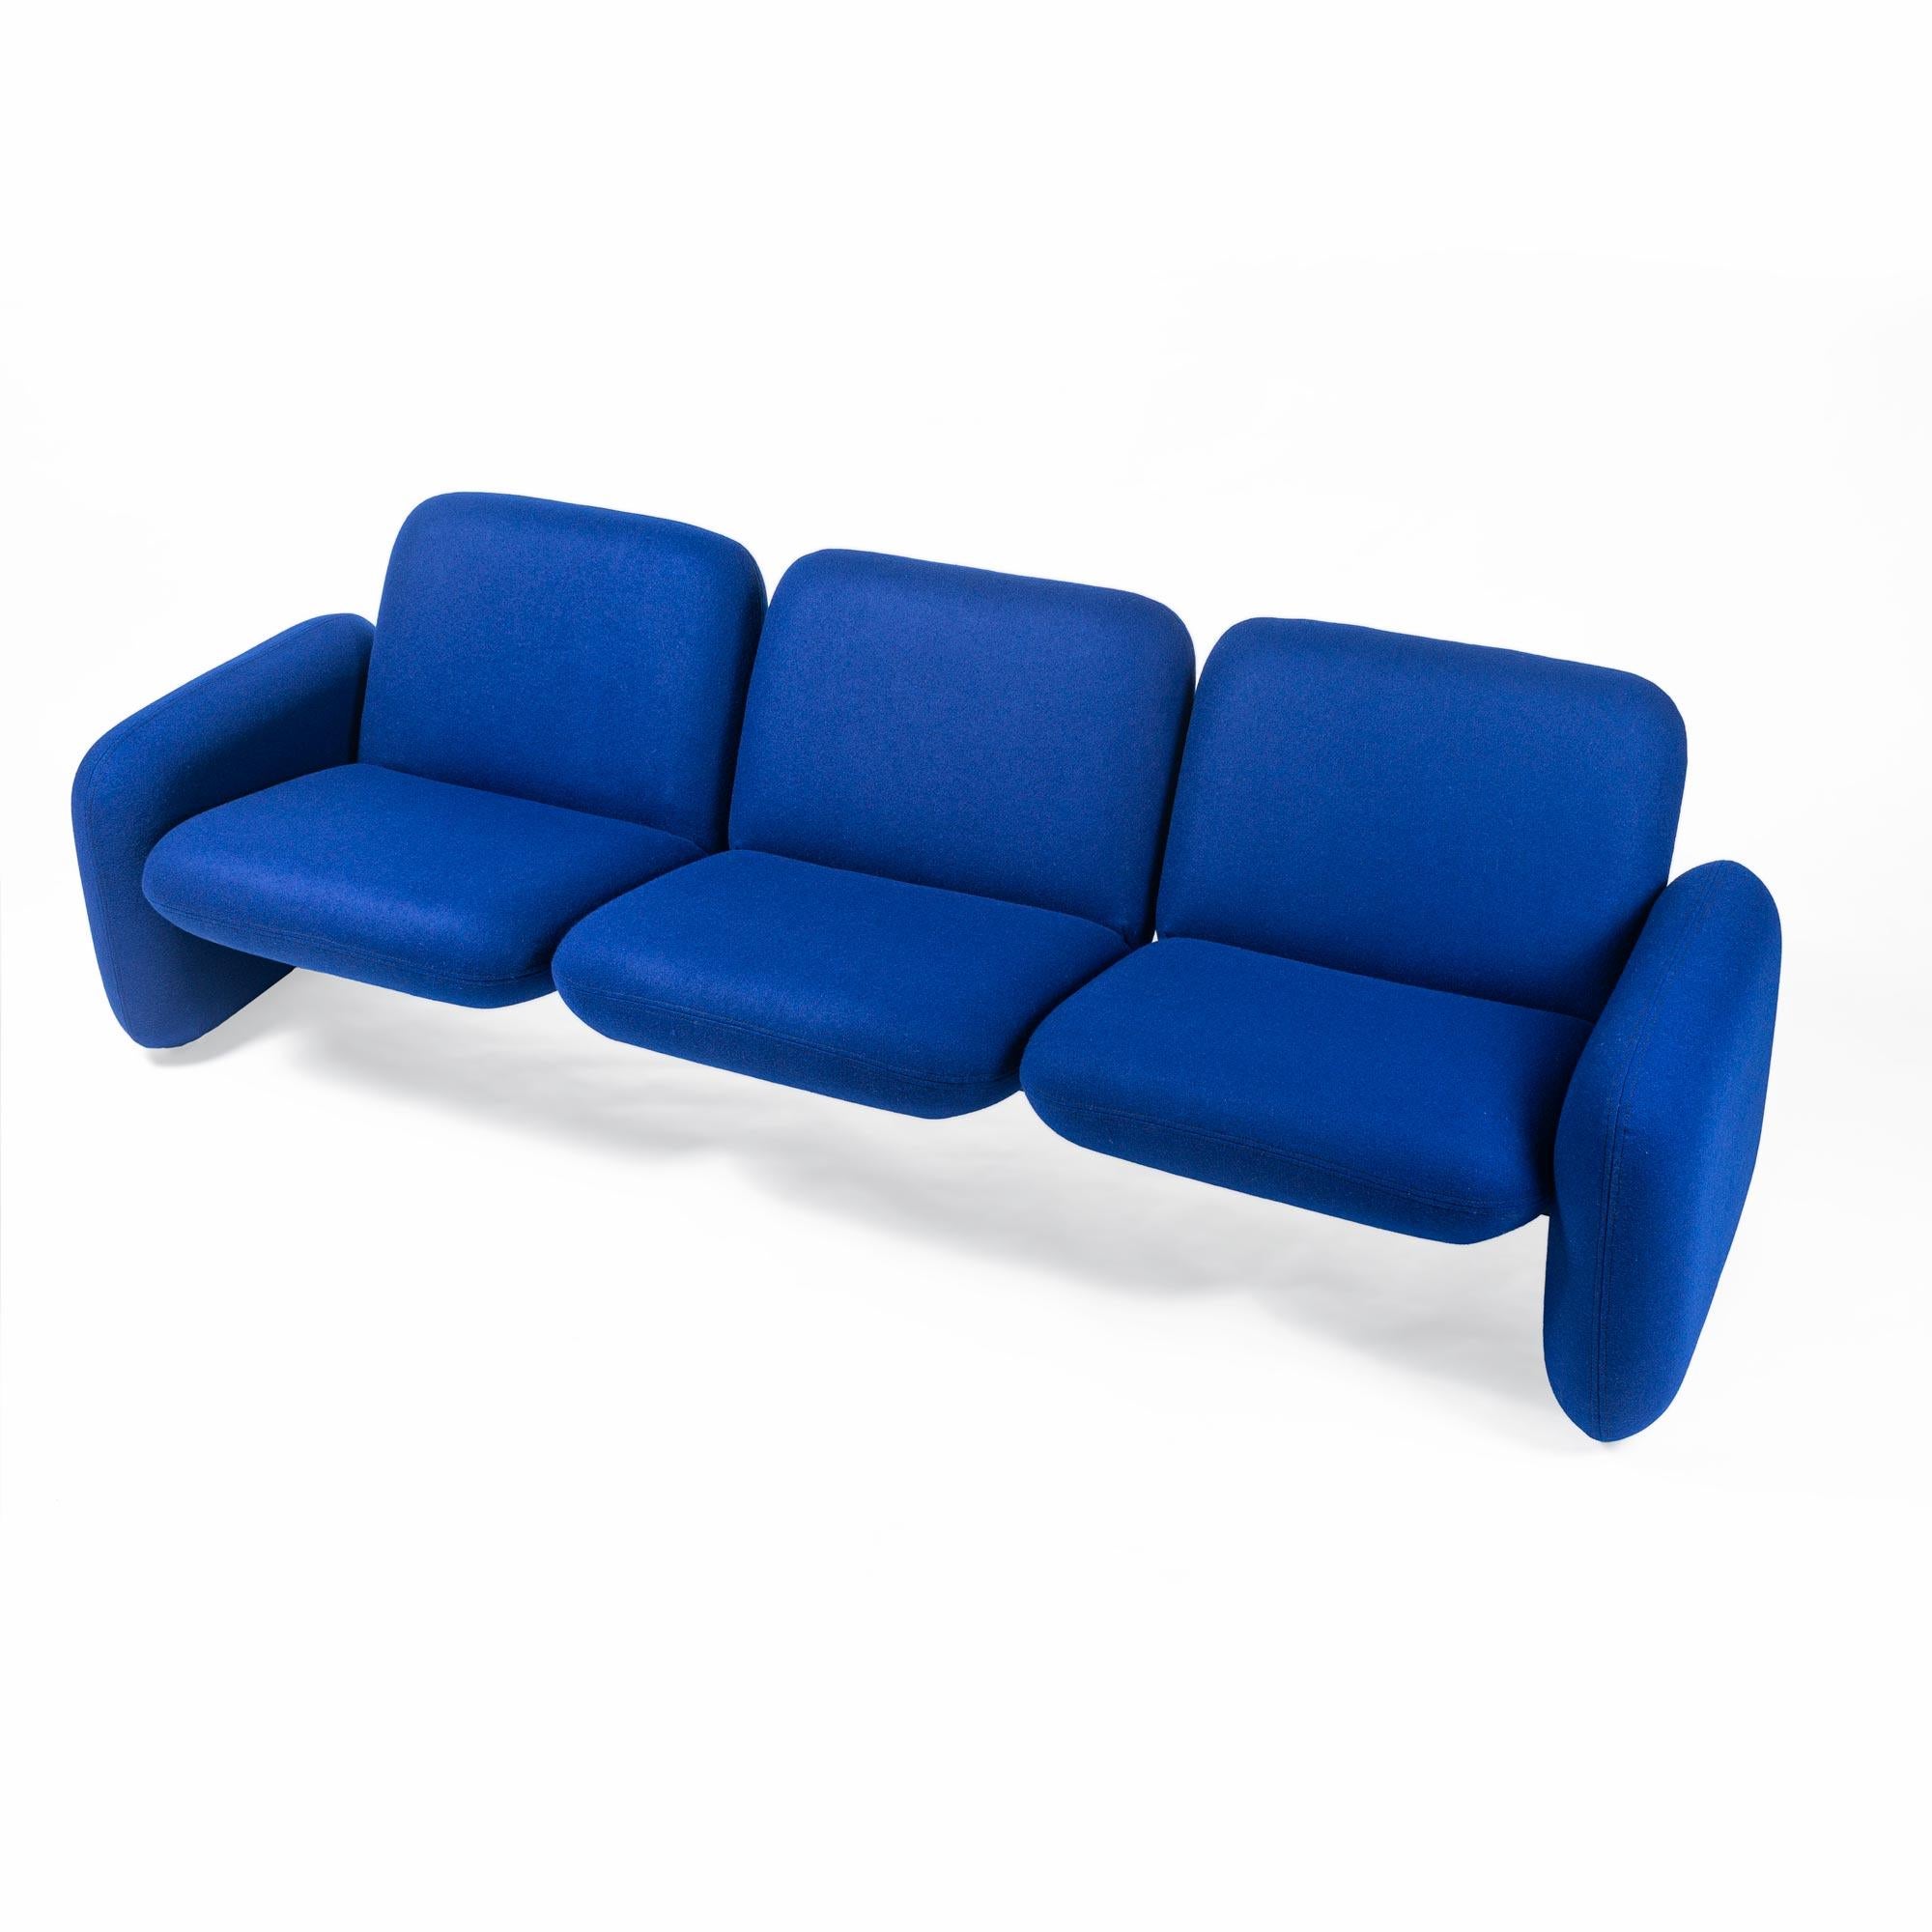 3 seater Chiclet sofa by Ray Wilkes for Herman Miller, newly reupholstered in Kvadrat Maharam Royal Blue Wool Fabric (not an option for new chiclet sofa). Original Chiclet sofa circa 1970s.
  